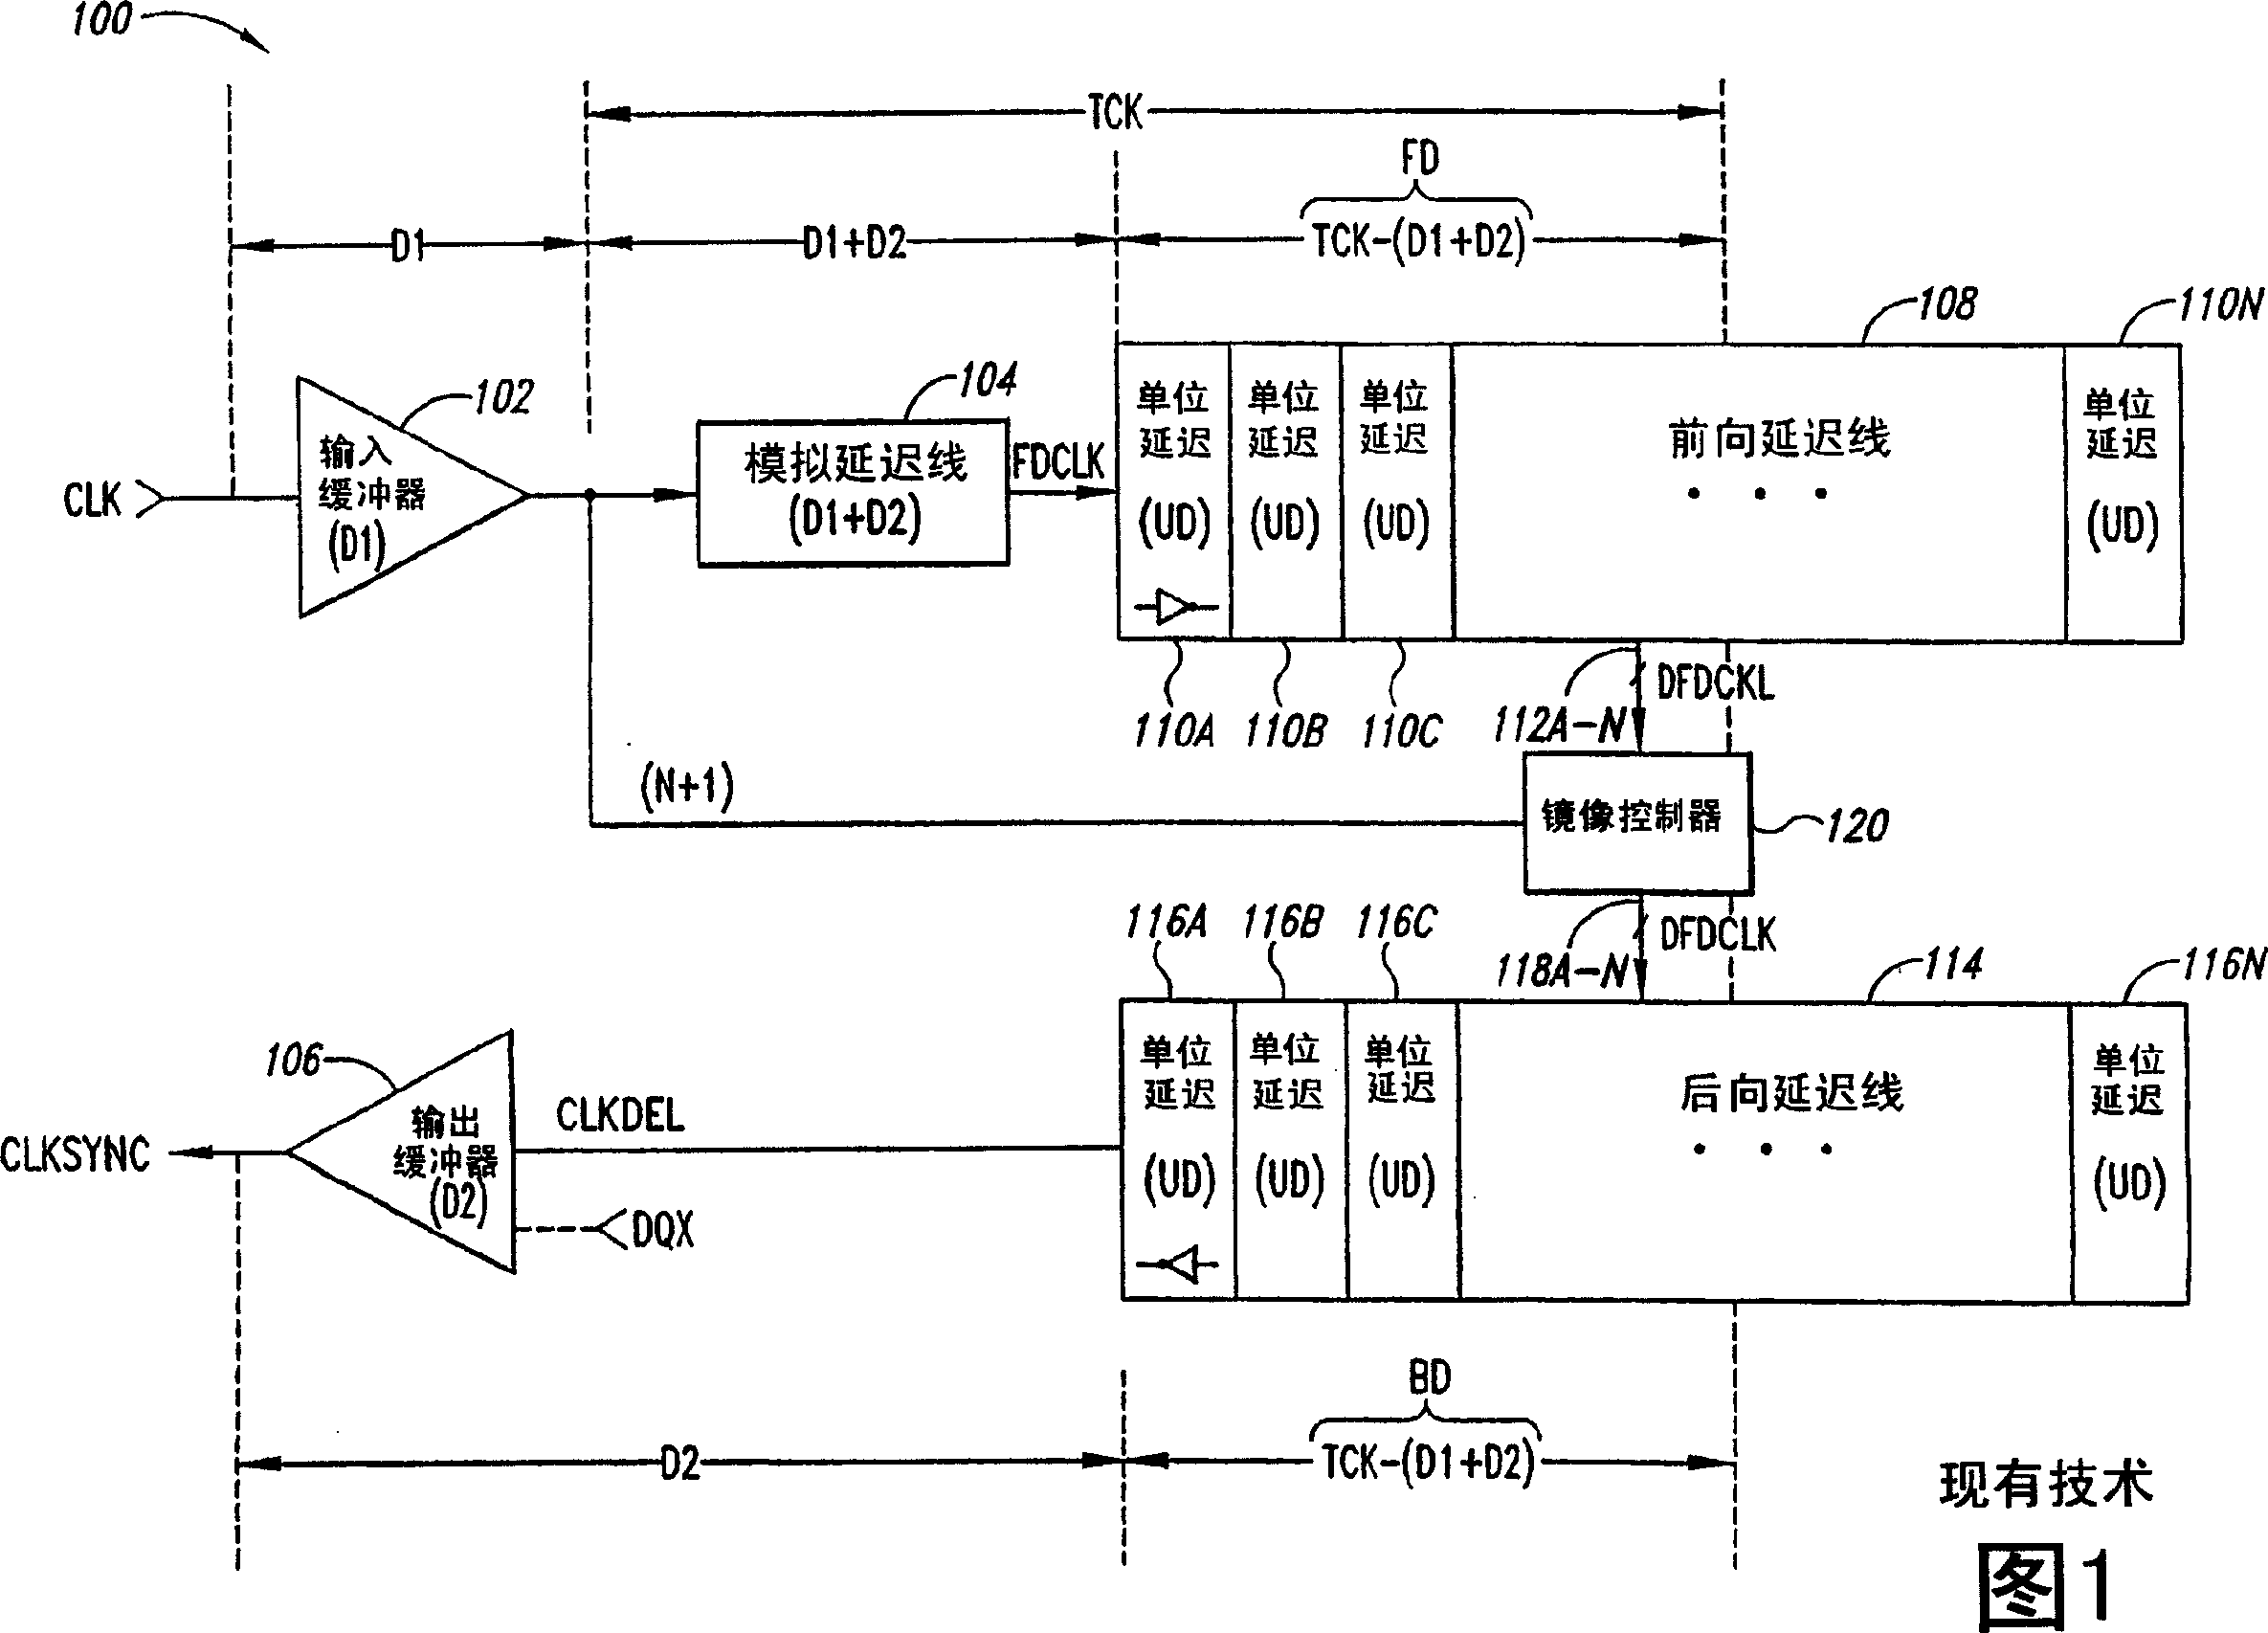 Synchronous mirror delay (SMD) circuit and method including a counter and reduced size bi-directional delay line